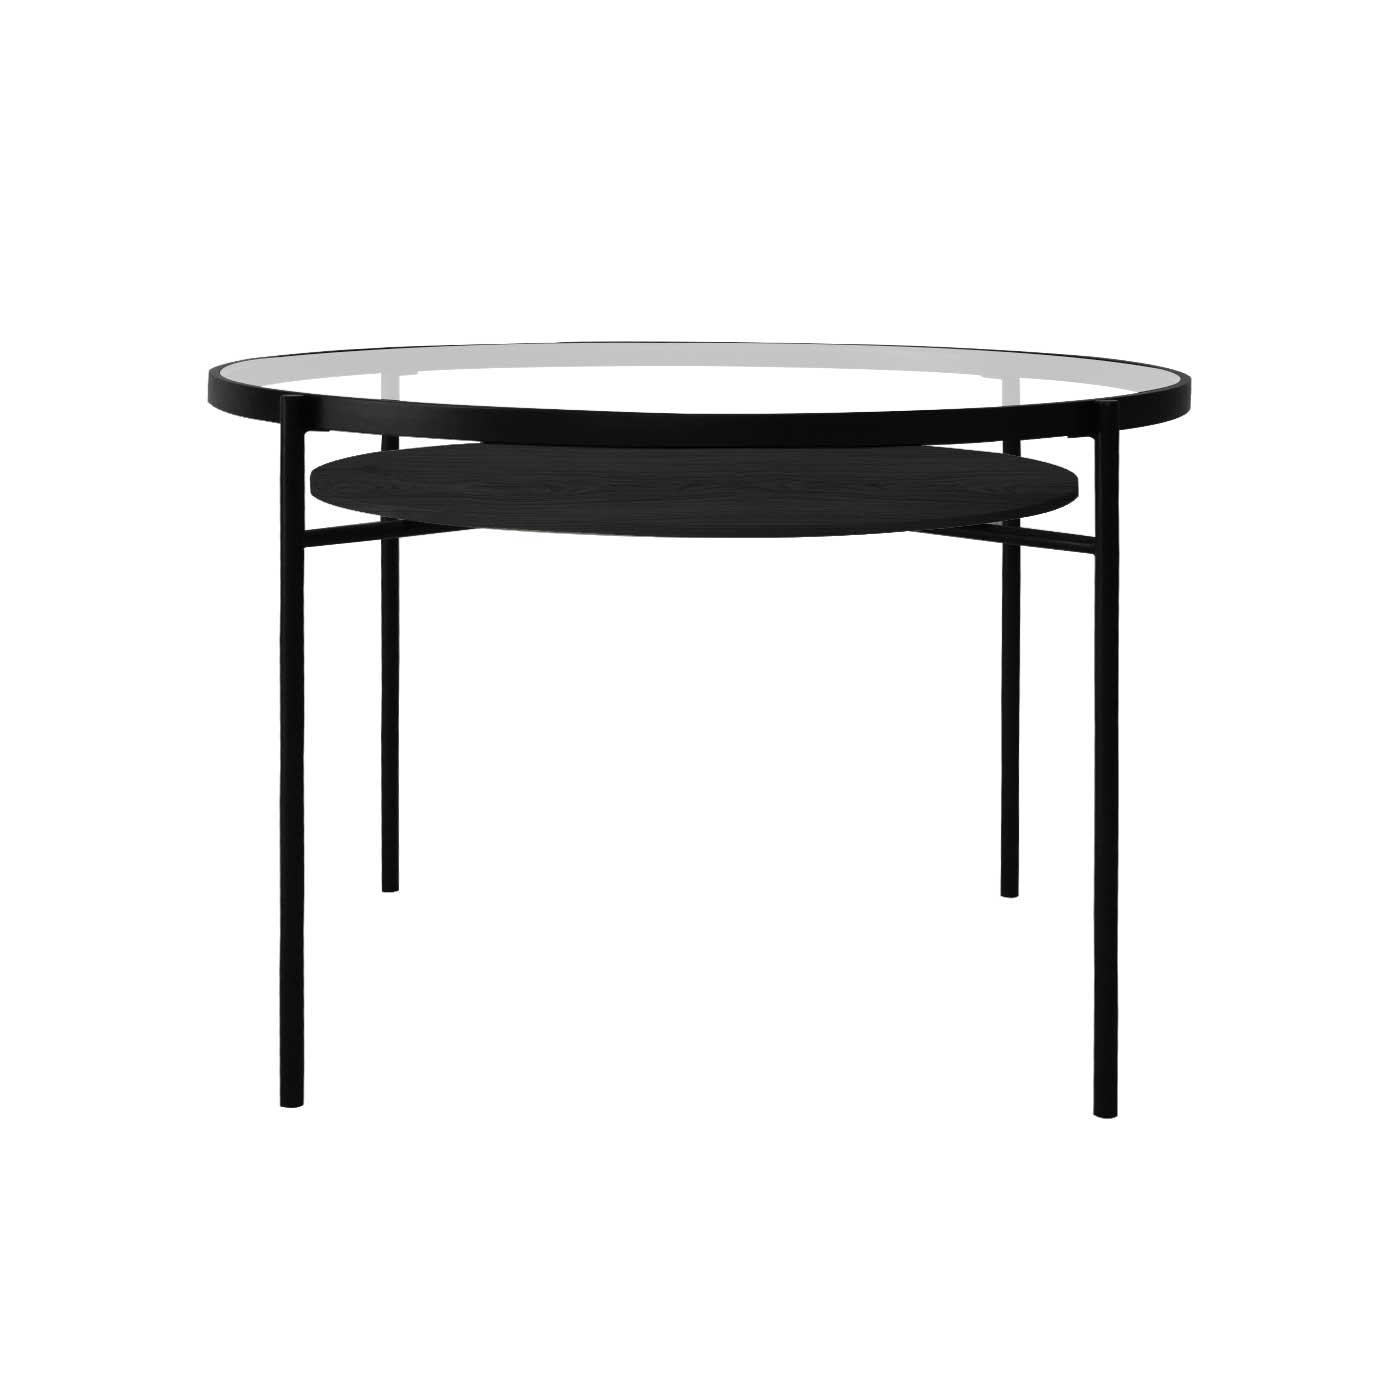 Sheffield Black Glass Round Conference Table